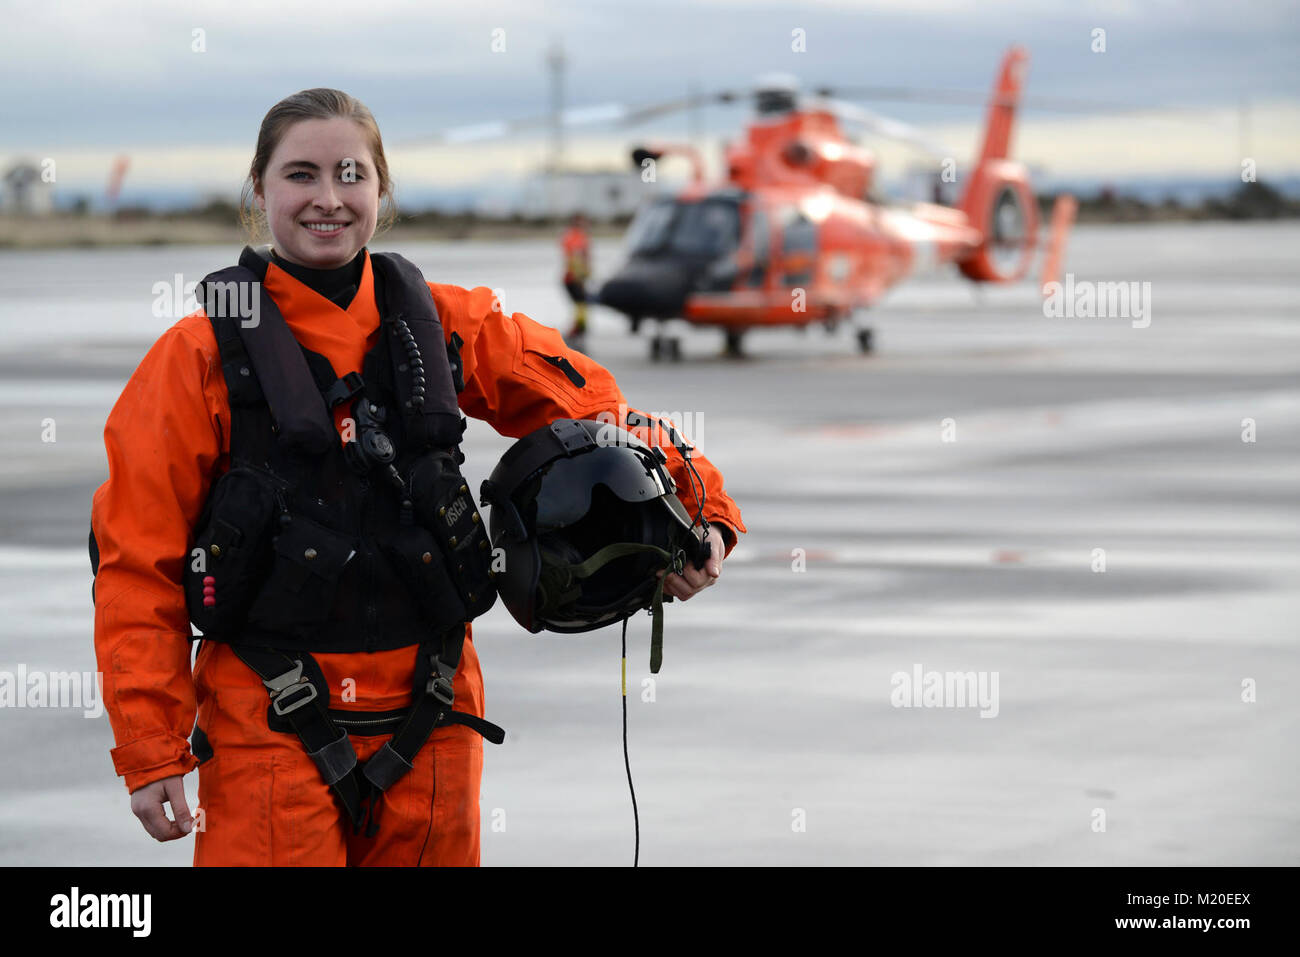 Coast Guard Petty Officer 3rd Class Amber Brewer, an aviation maintenance technician, Air Station Port Angeles, Wash., poses for a picture on the the flight line in front of an MH-65 Dolphin Helicopter, Jan. 26, 2018.    Brewer not only maintains the readiness of the aircraft, but is also a qualified flight mechanic responsible for overseeing the mechanical safety of the helicopter and conducting the essential hoisting operations conducted during rescue swimmer deployments.    U.S. Coast Guard Stock Photo